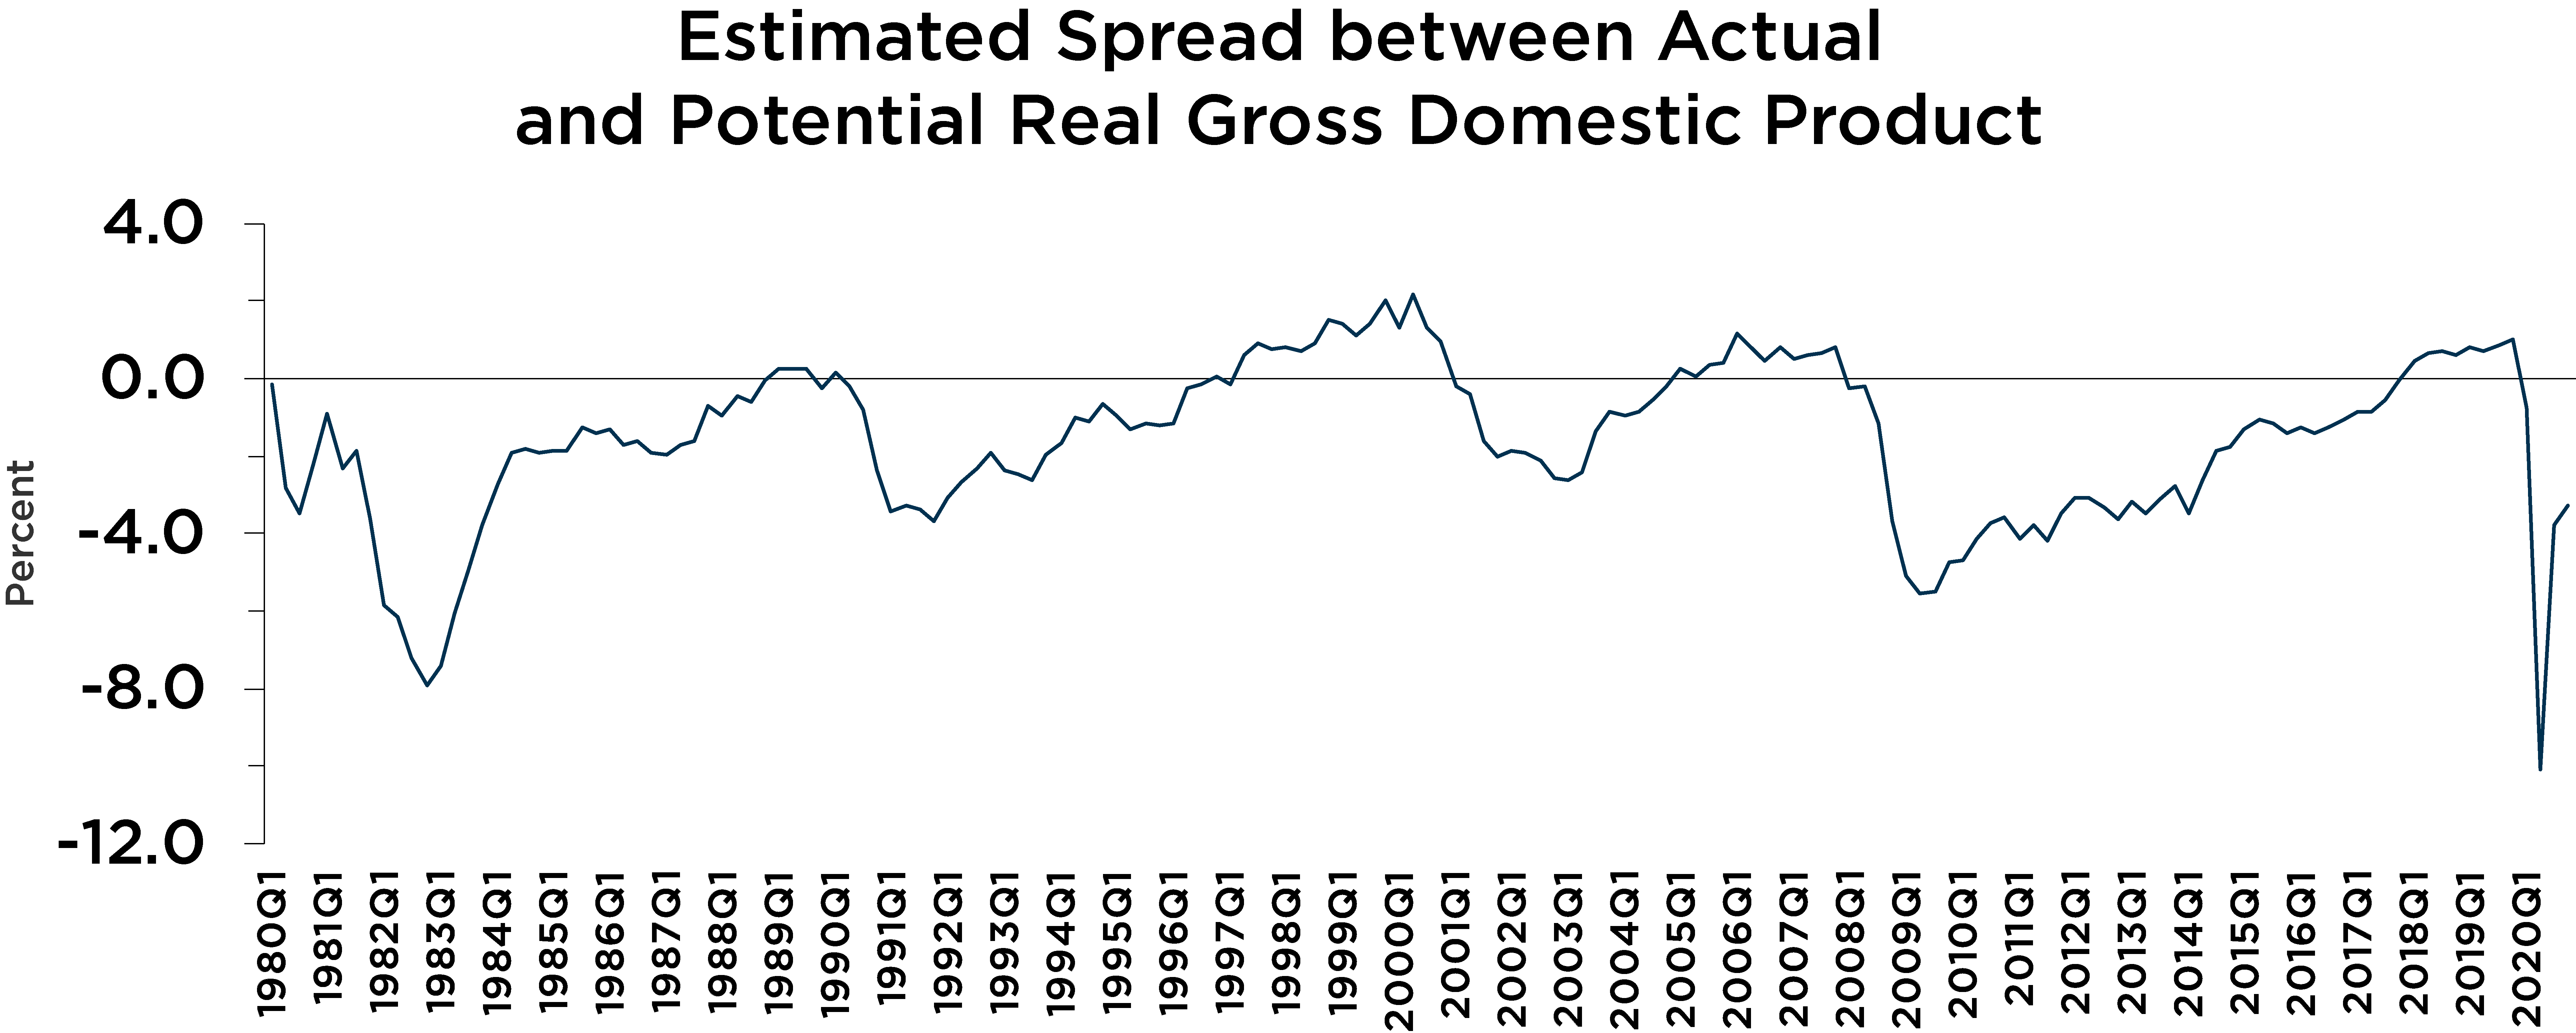 Graph depicting estimated spread between actual and potential RGDP